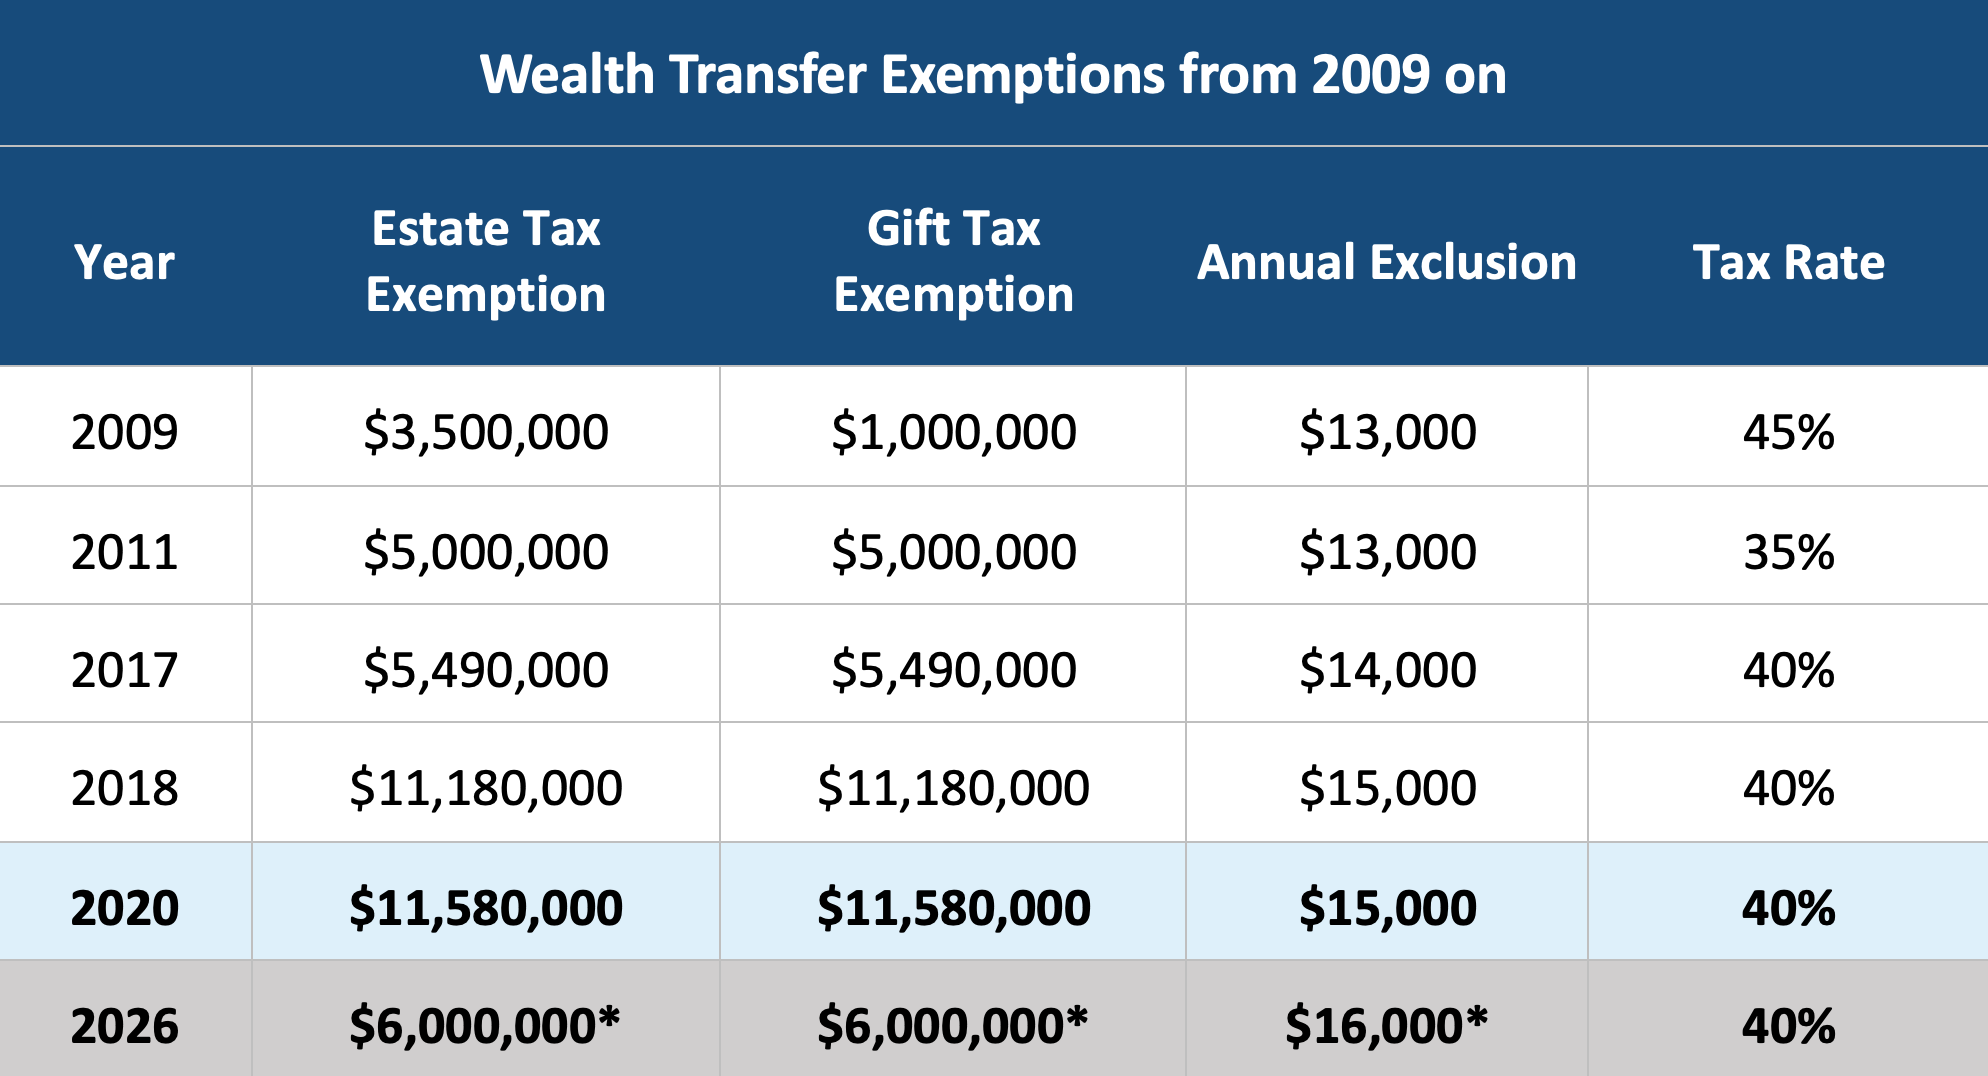 Wealth transfer exemptions from 2009 on